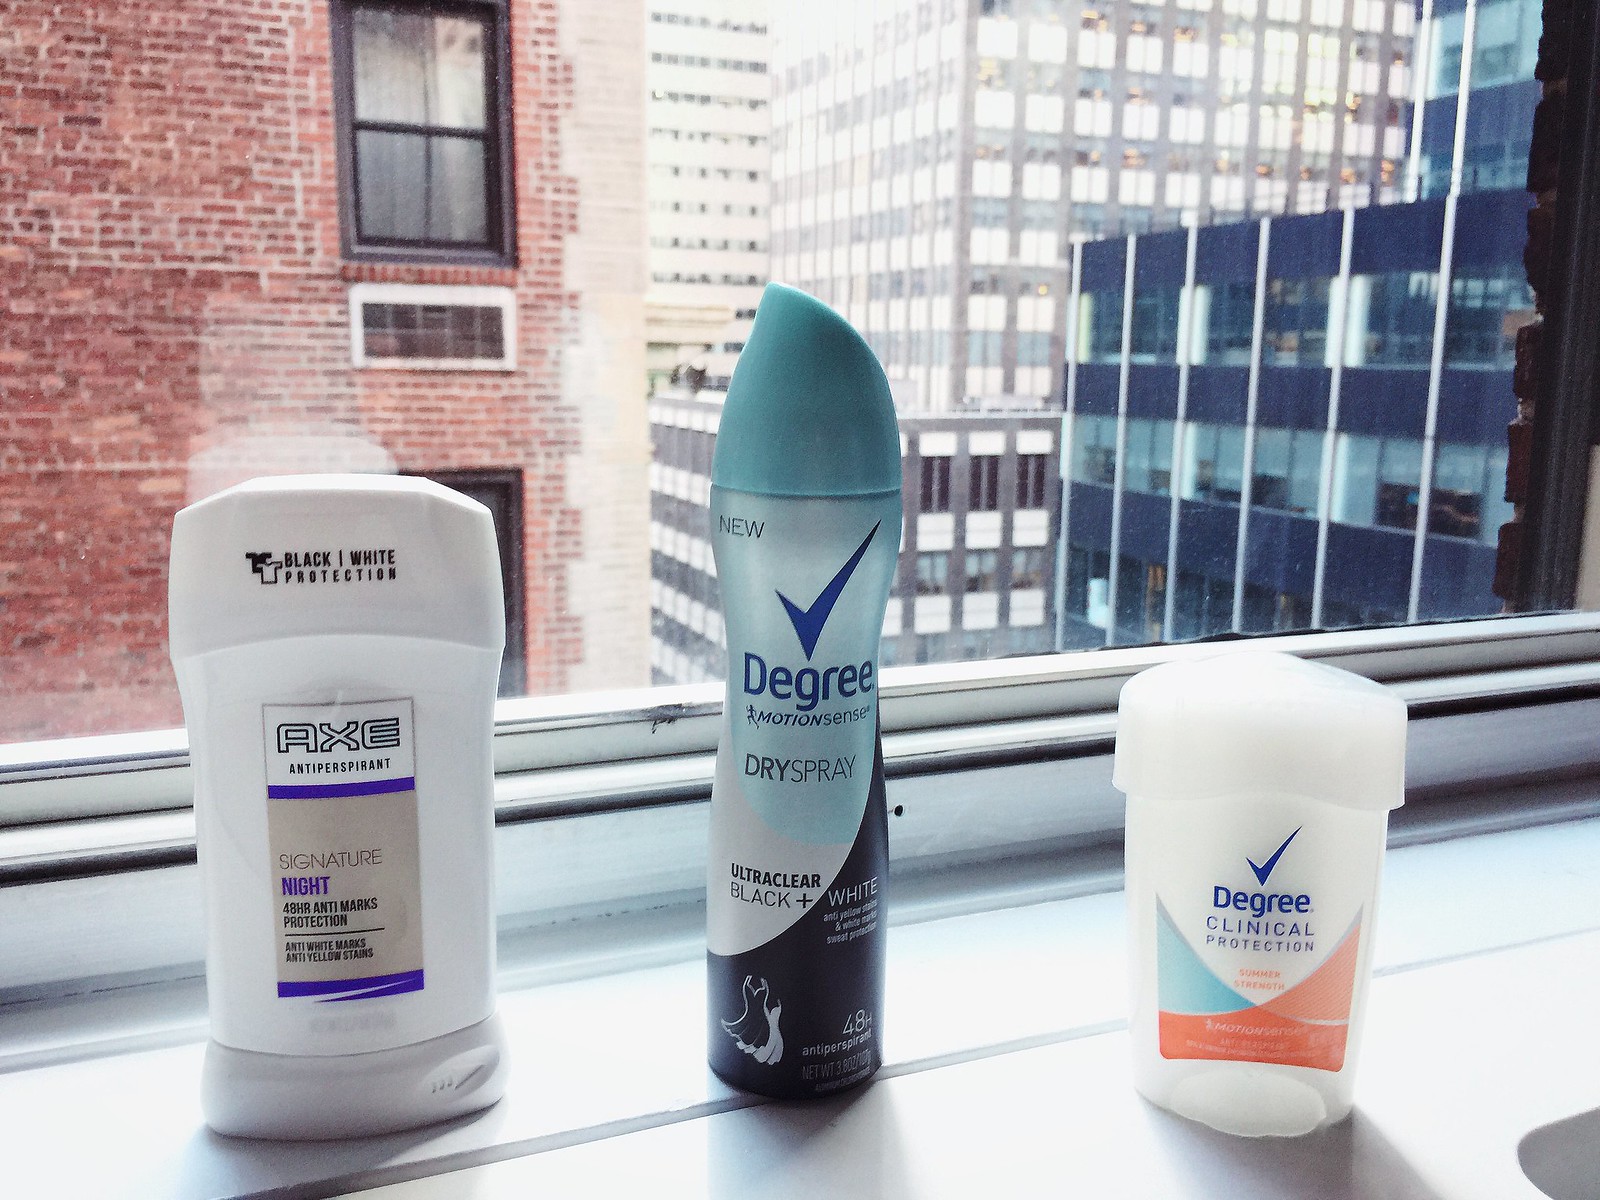 what type of deodorant suits your personal lifestyle